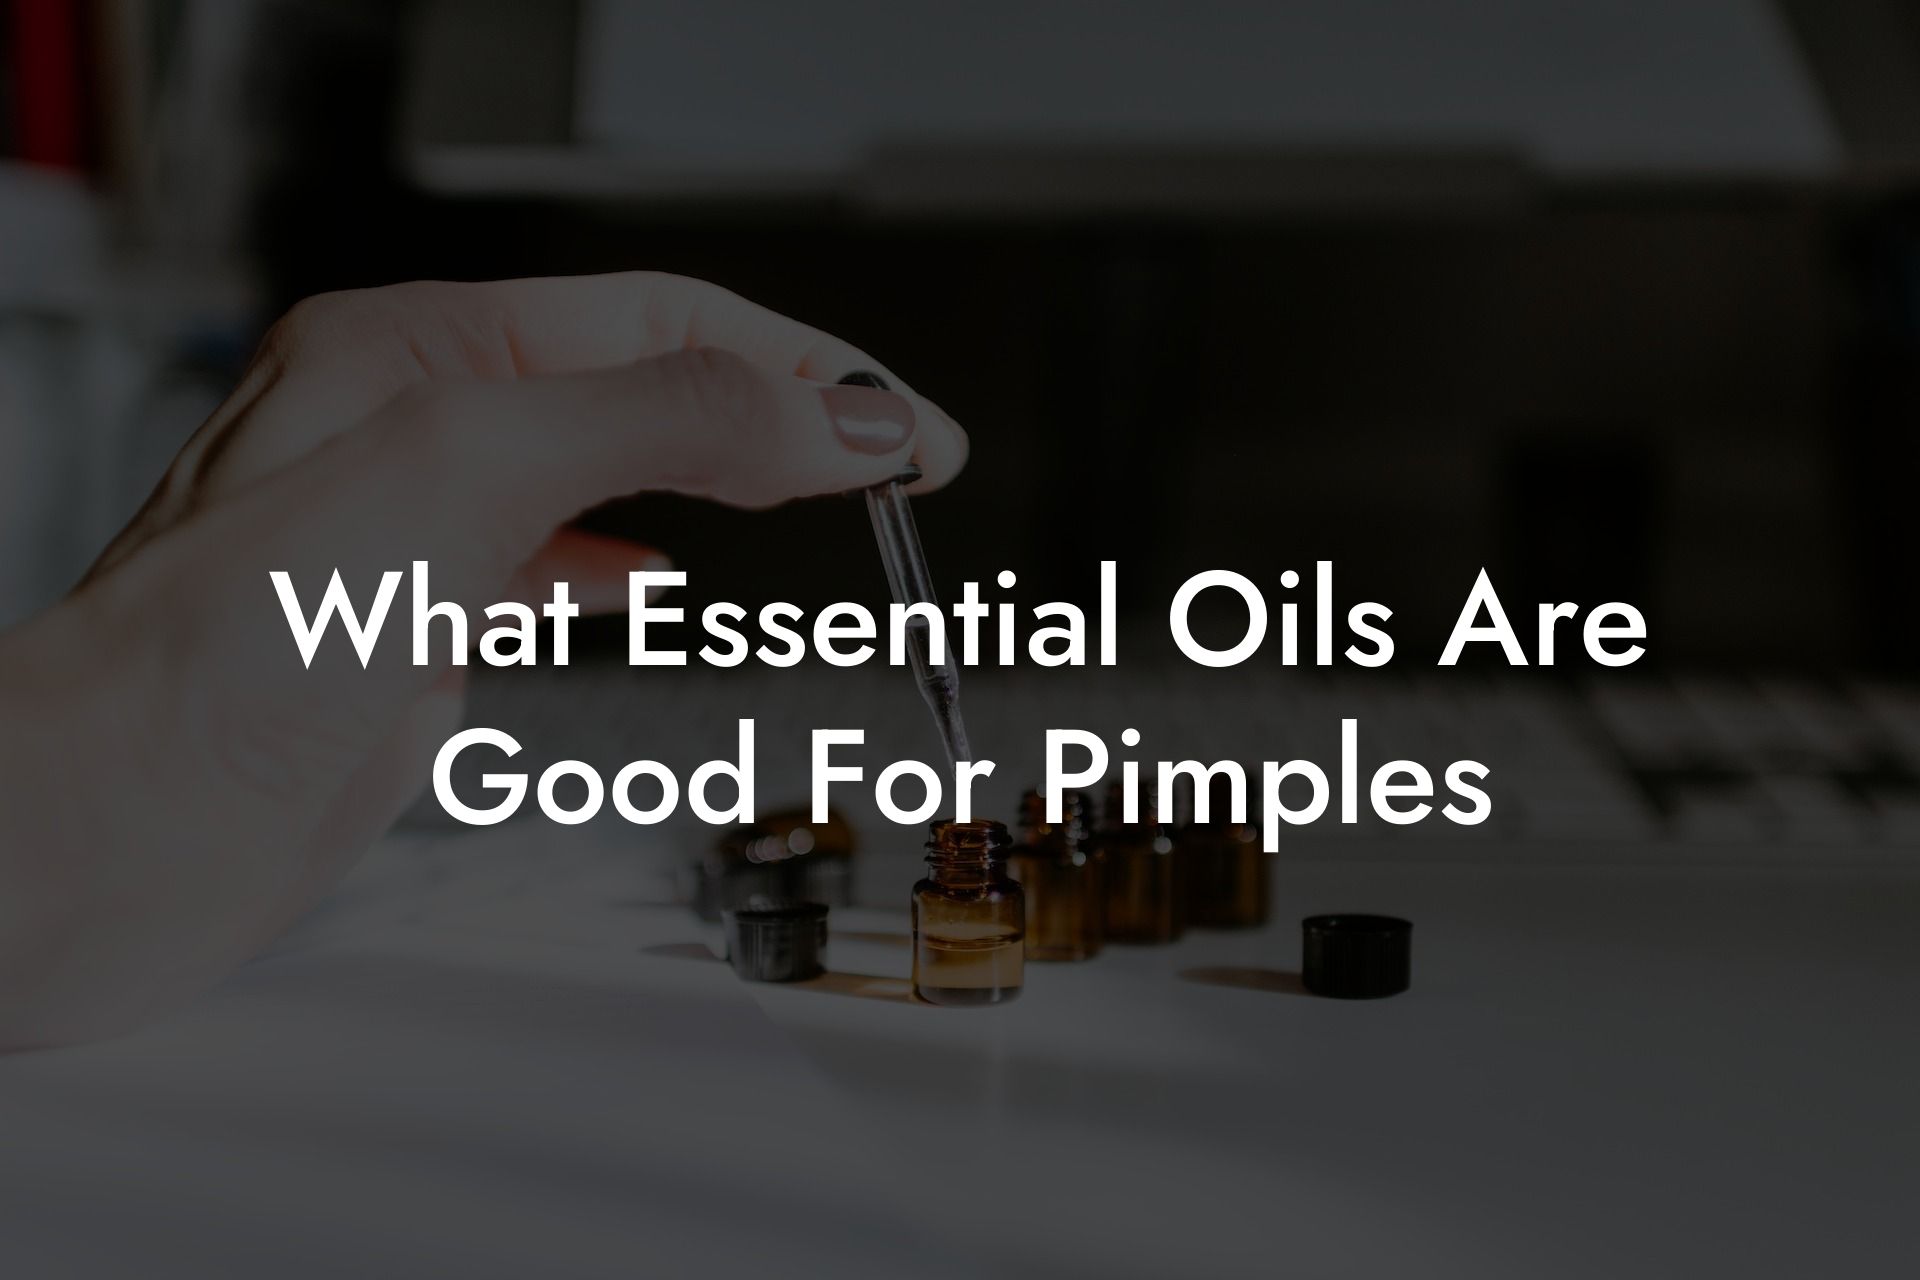 What Essential Oils Are Good For Pimples